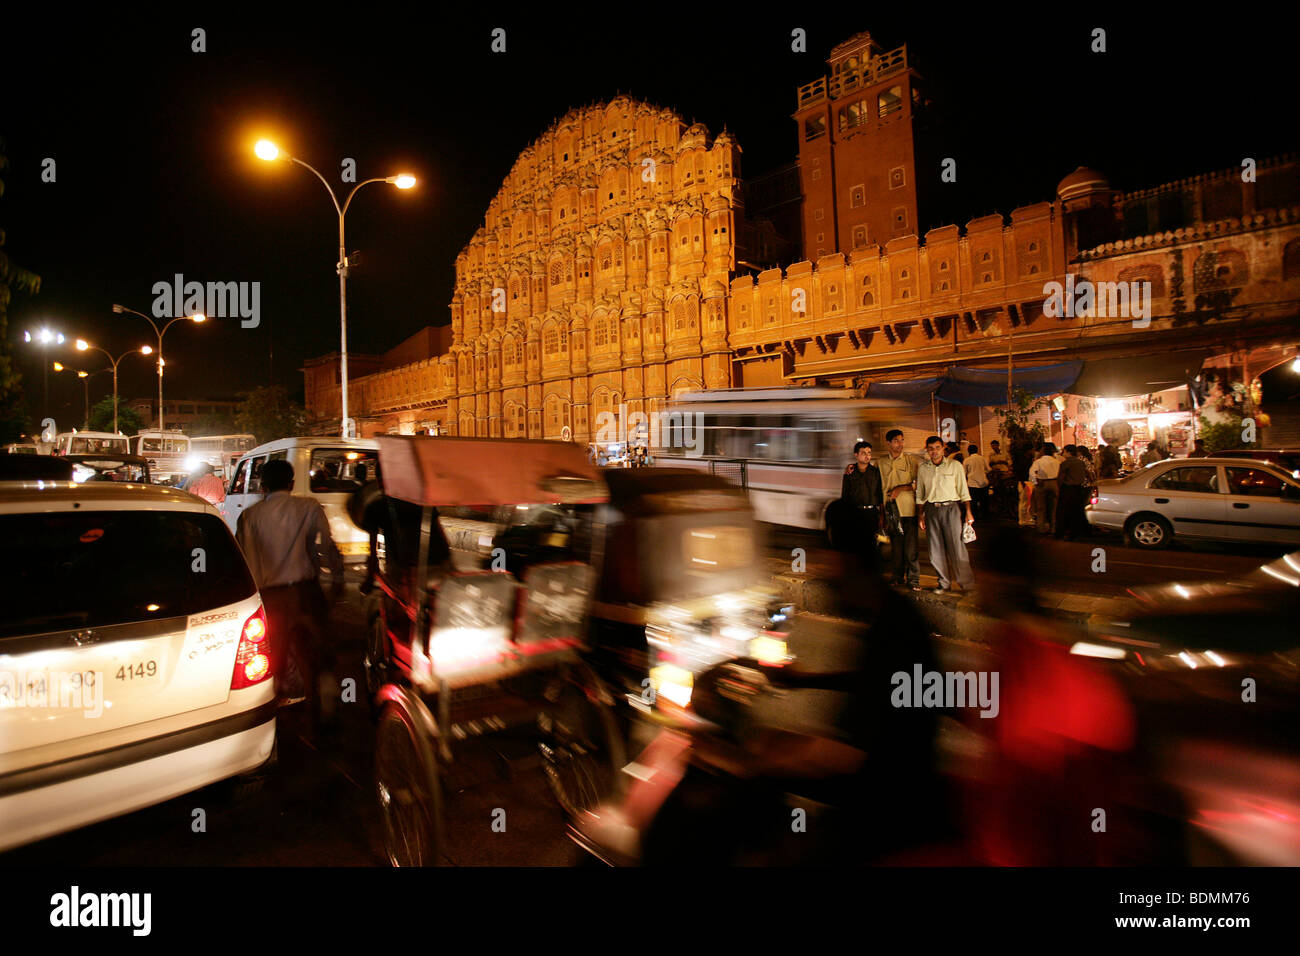 Nightly road scene in front of the Hawa Mahal, the Palace of Winds in Jaipur, Rajasthan, India Stock Photo